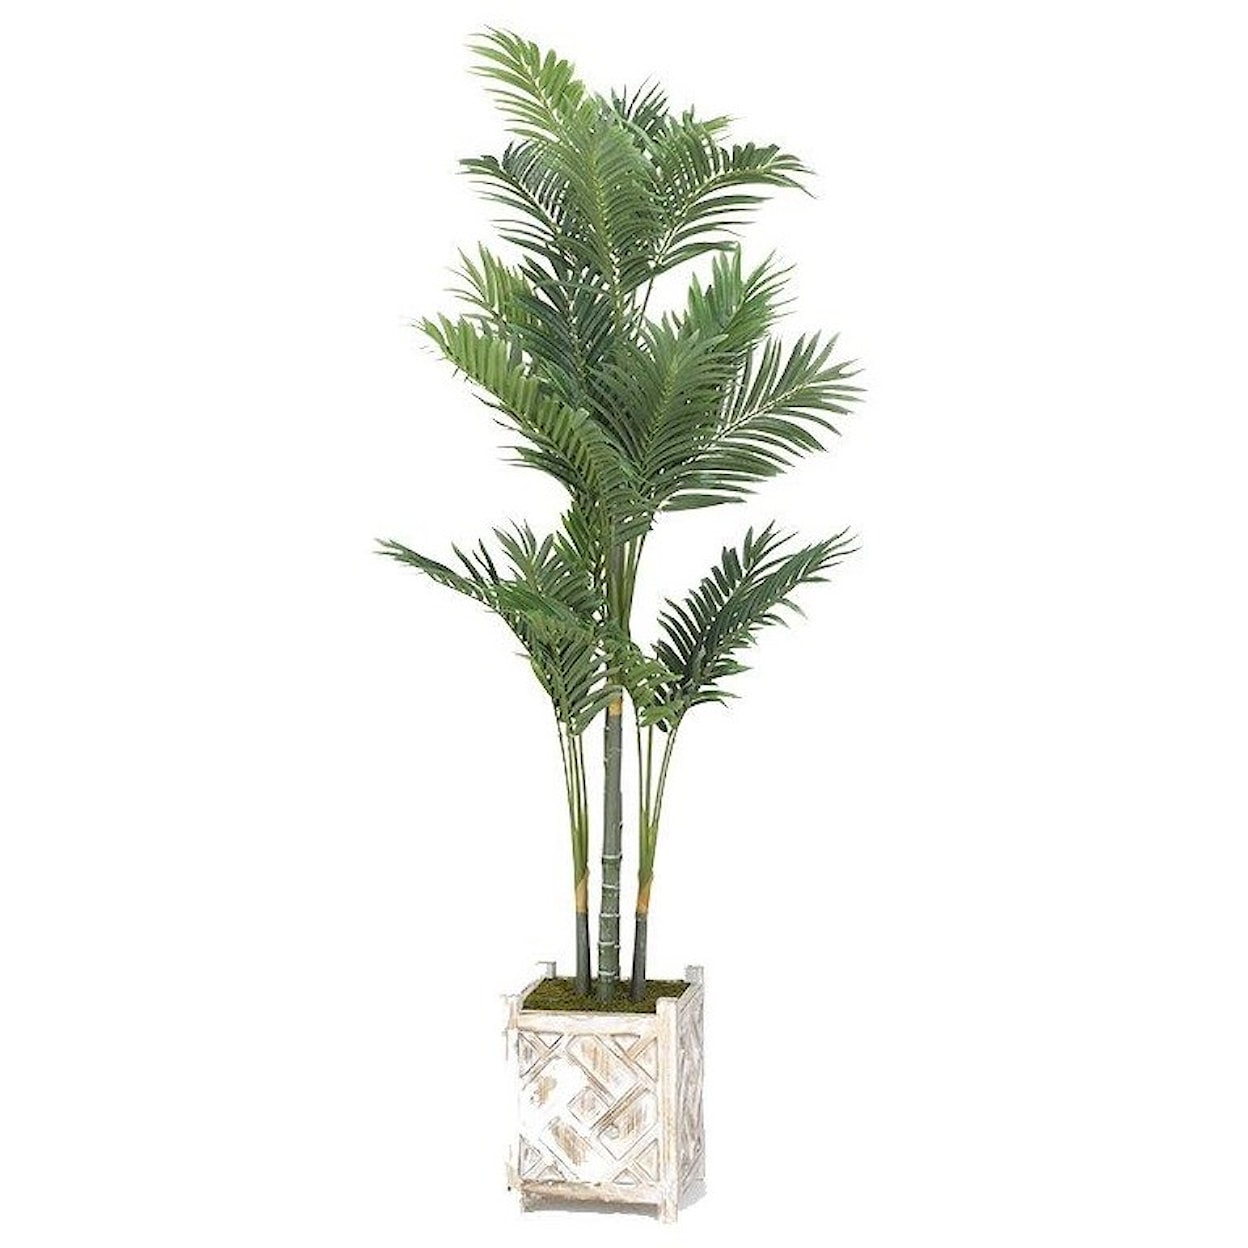 D&W Silks Artificial Trees Golden Palm Tree in Square Wooden Planter